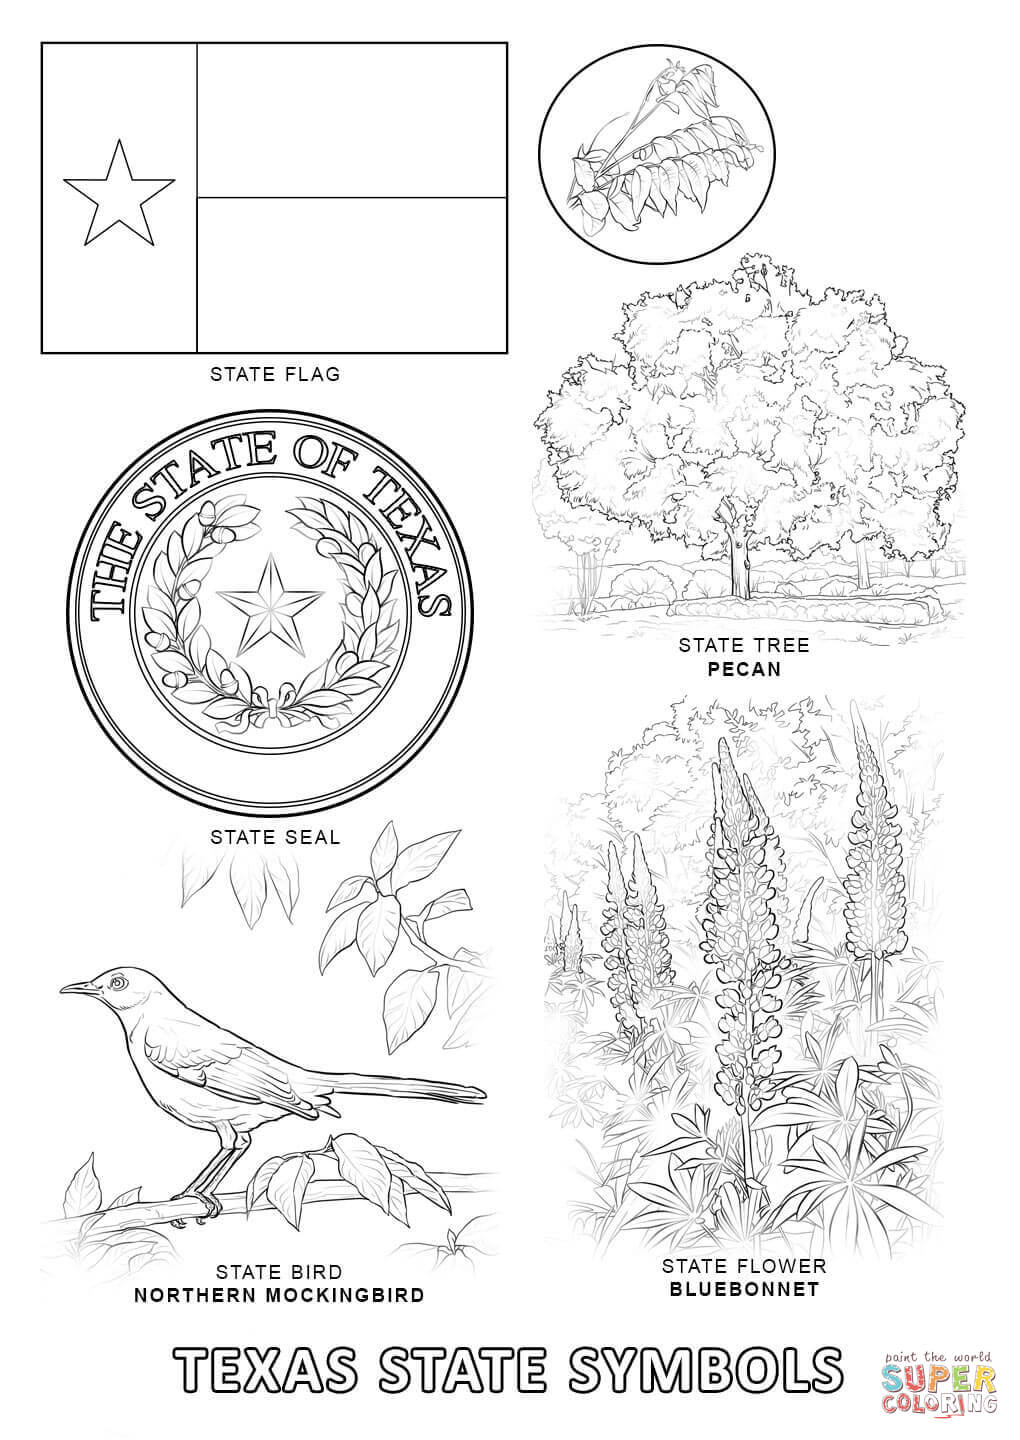 Texas State Symbols coloring page | Free Printable Coloring Pages